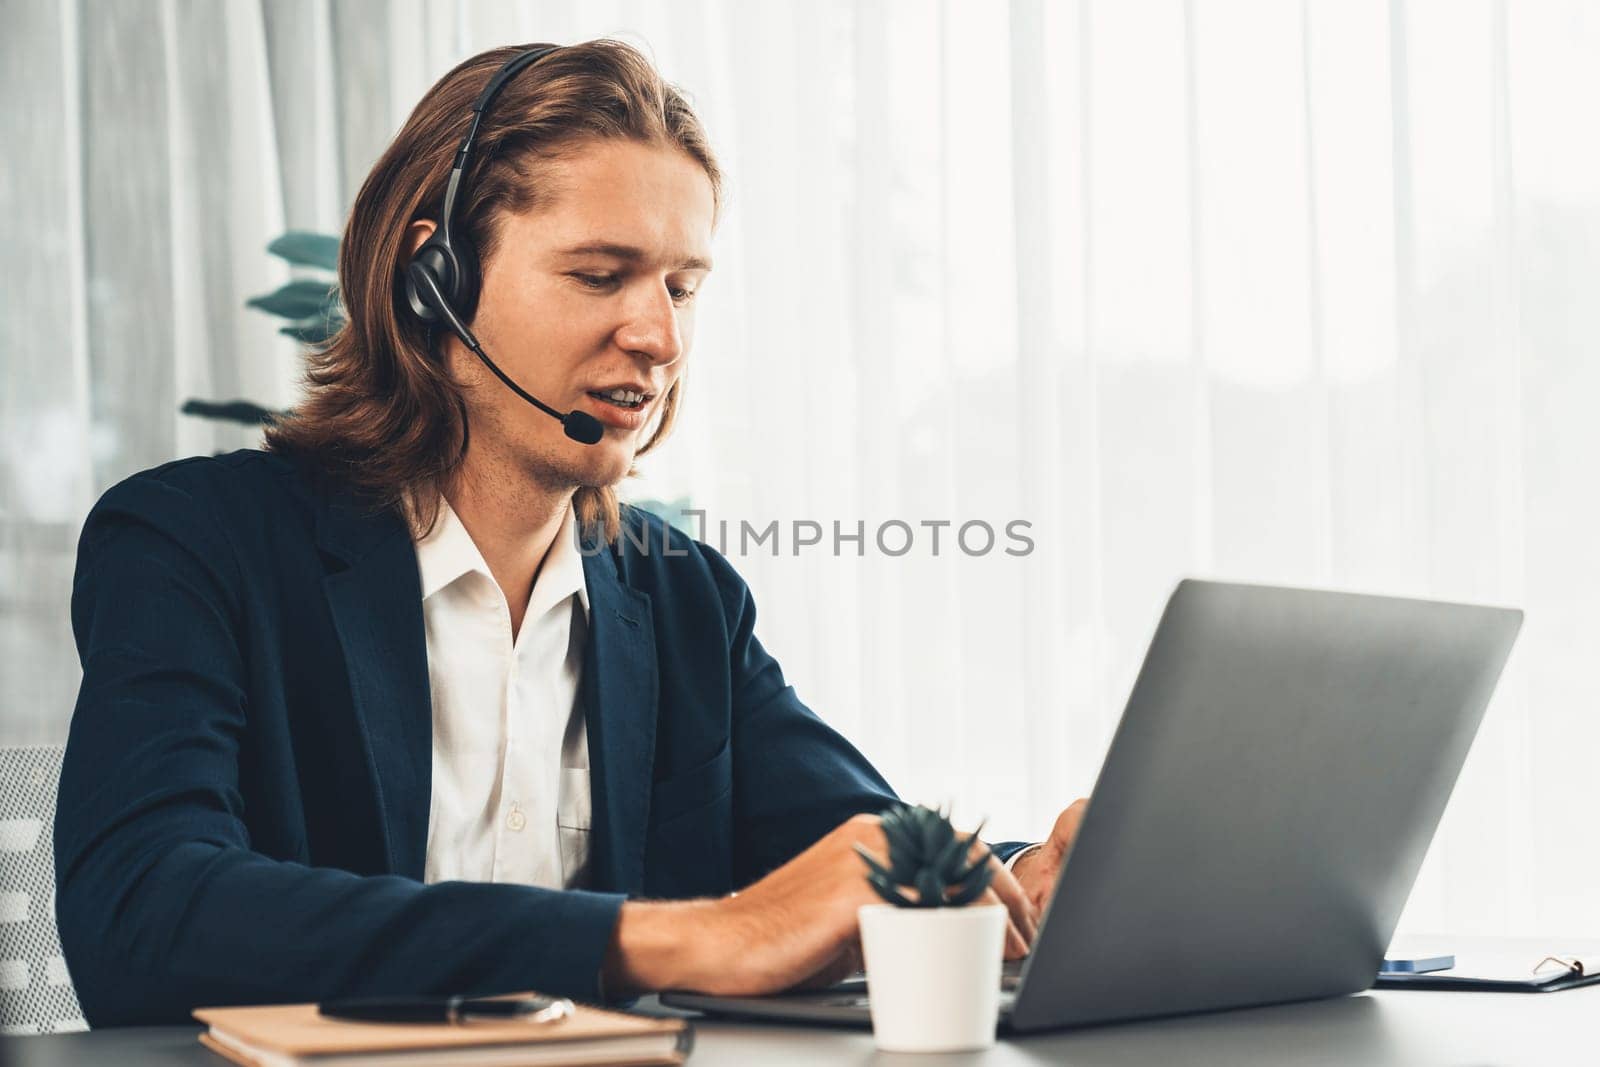 Male customer service operator or telesales agent portrait. Entity by biancoblue